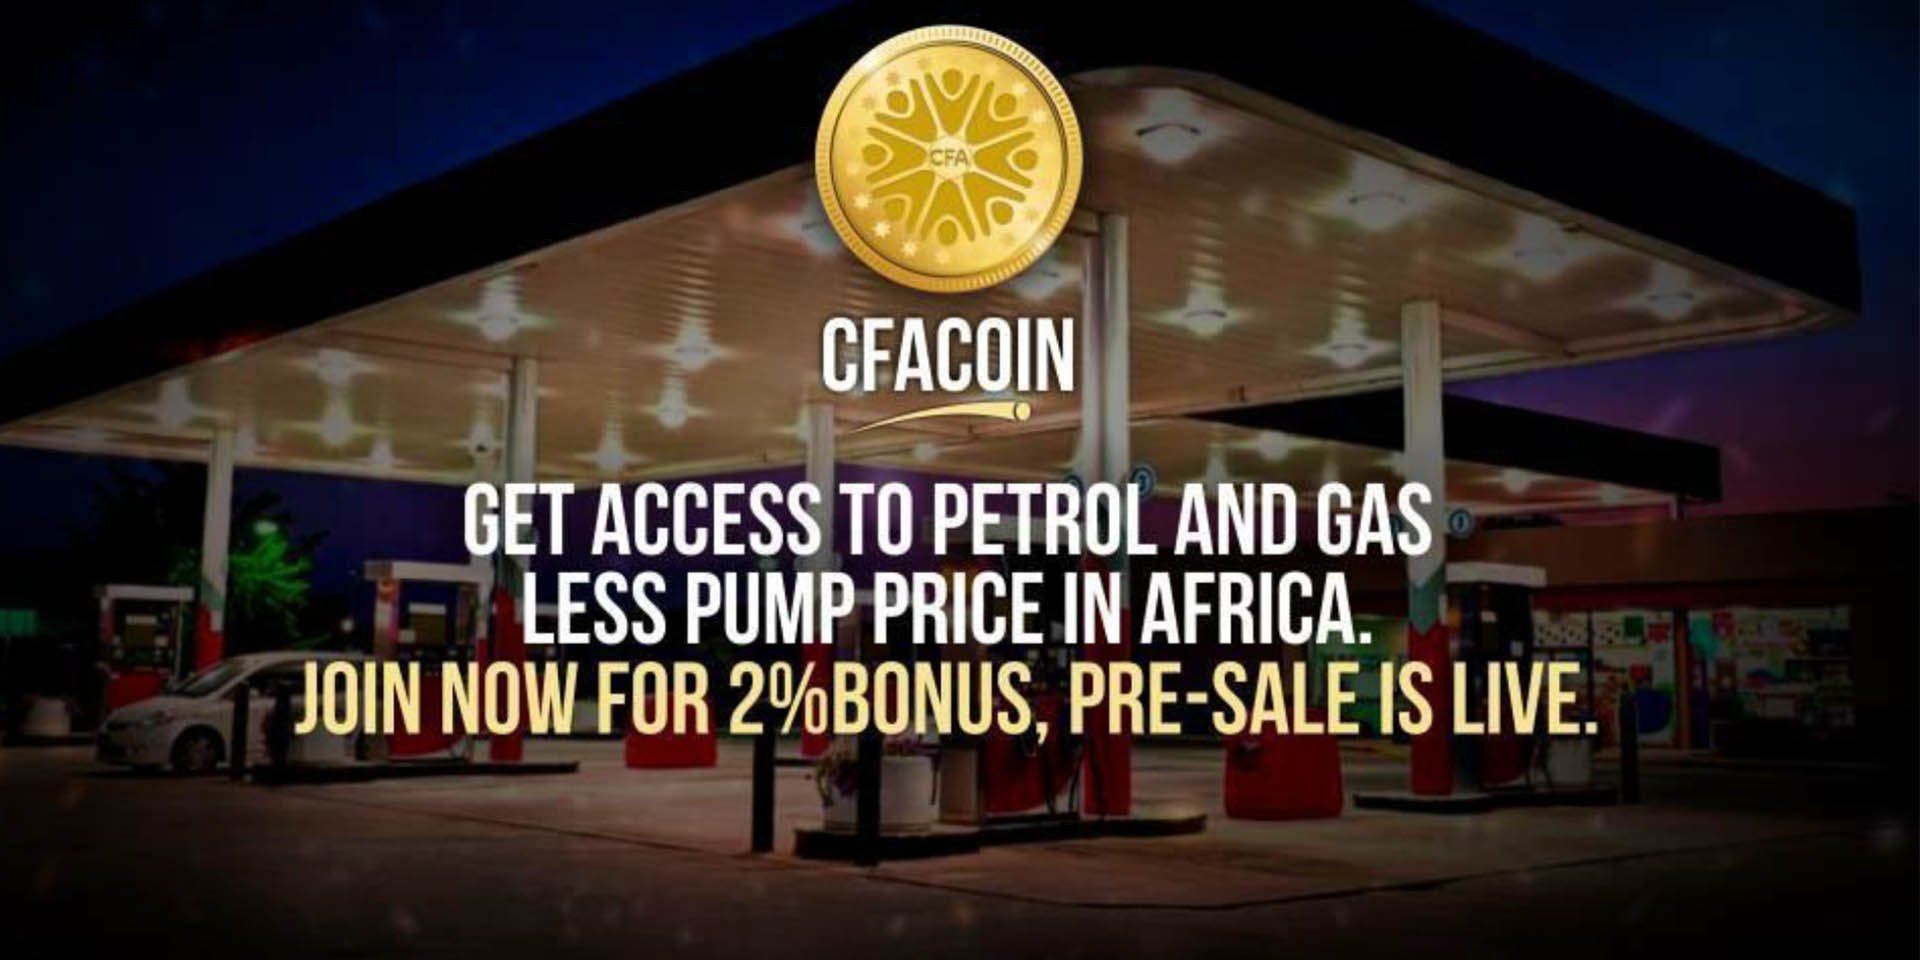 CFACoin Aims to Revolutionize Oil and Gas, Making Petrol and Gas Assesible, Affordable in Africa. Join Crowd Sale.